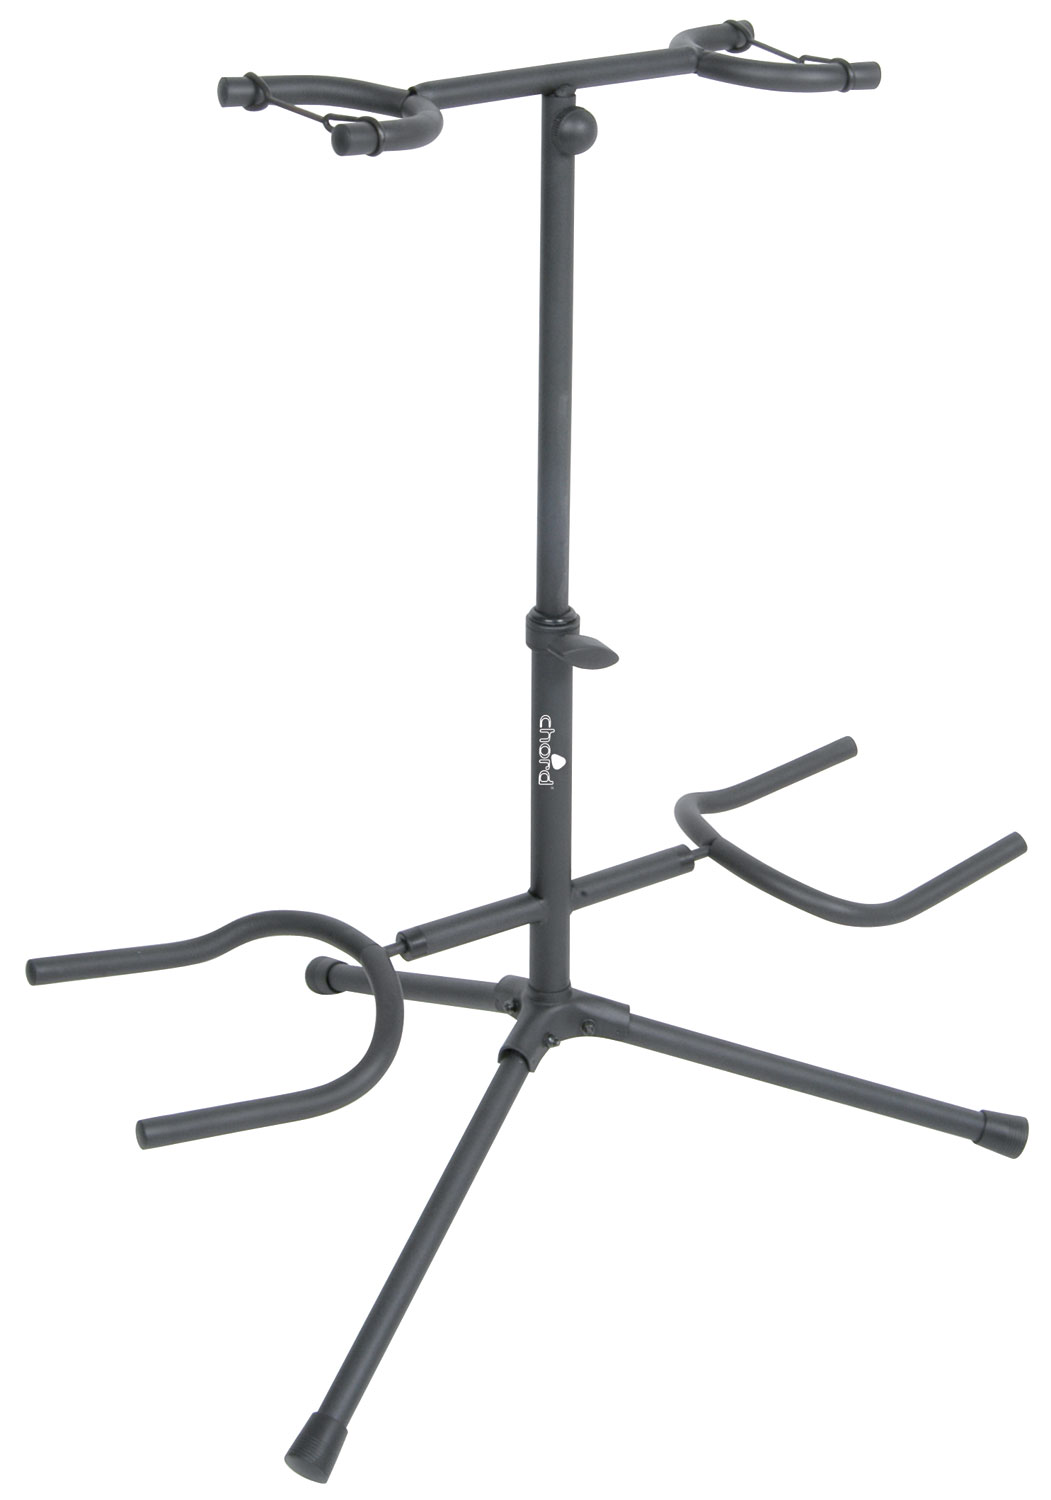 Chord Dual Guitar Stand with Neck Support - Stalak za dve gitare